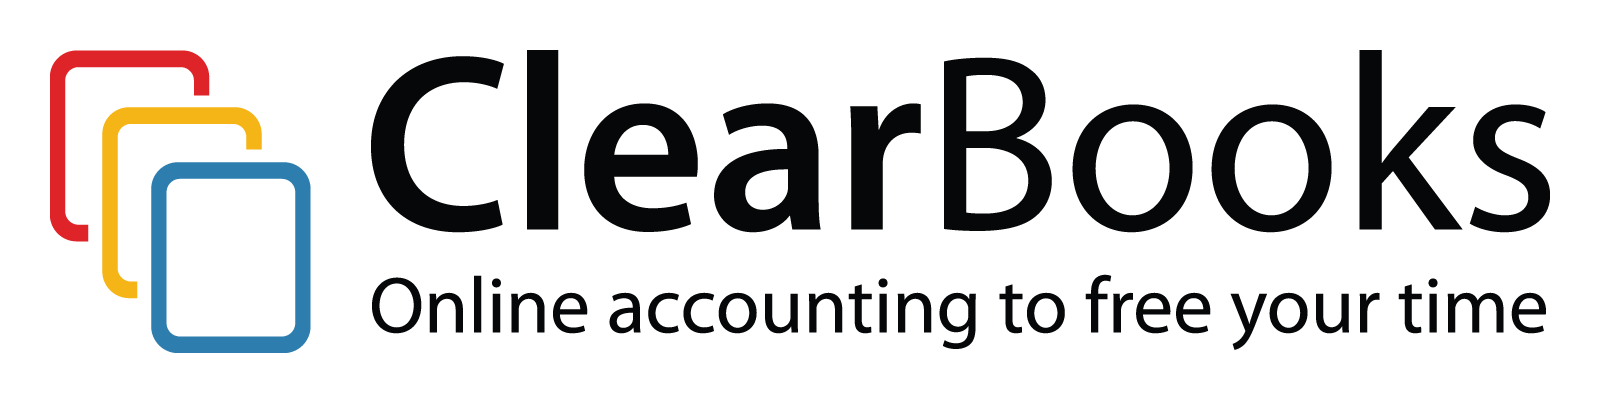 Online Accounting Solutions - ClearBooks Review - Plasterers News